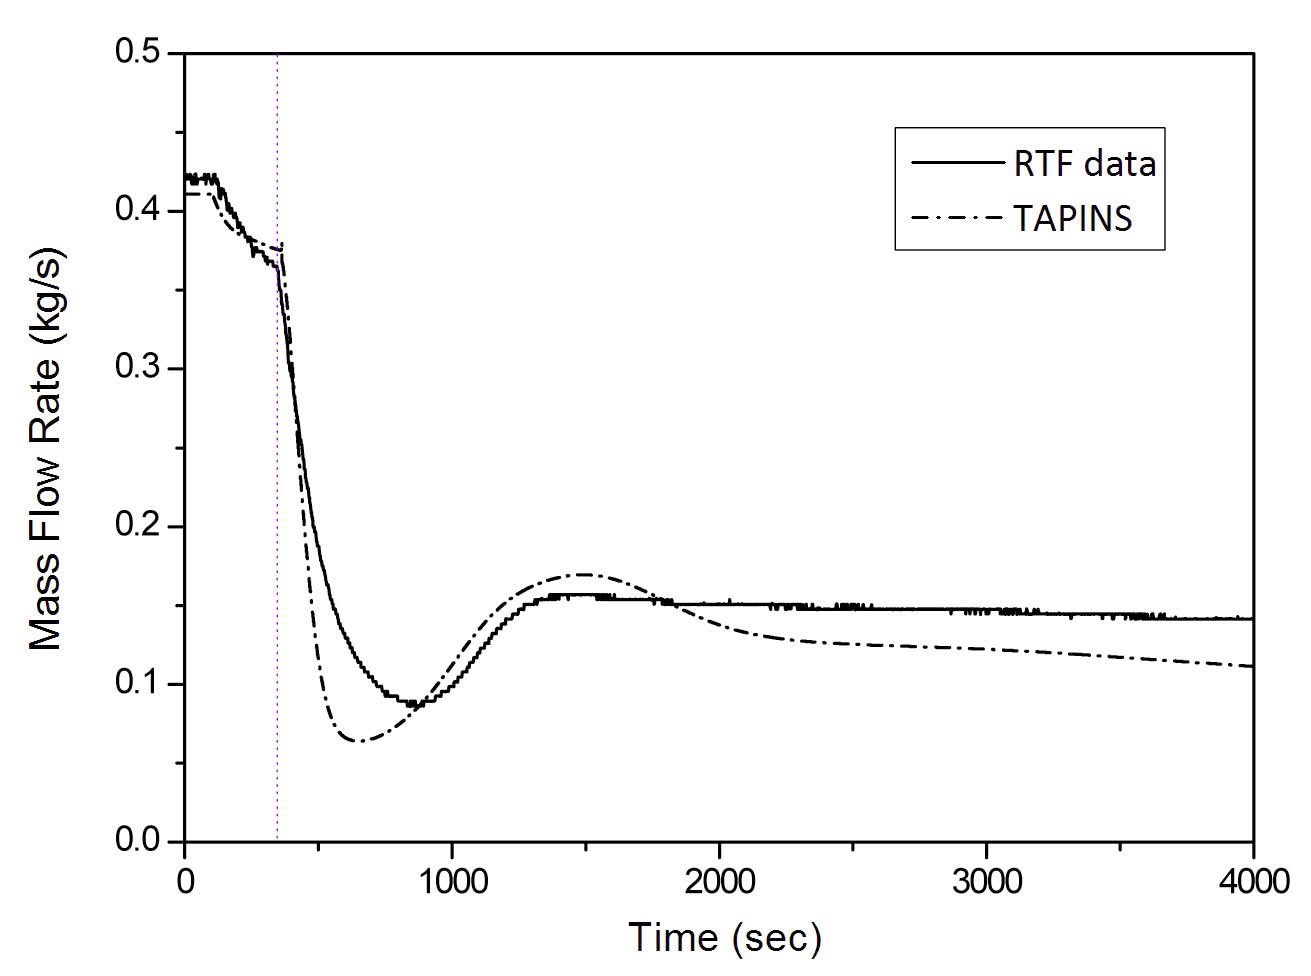 Coolant Flow Rate in Response to the LOFW Accident